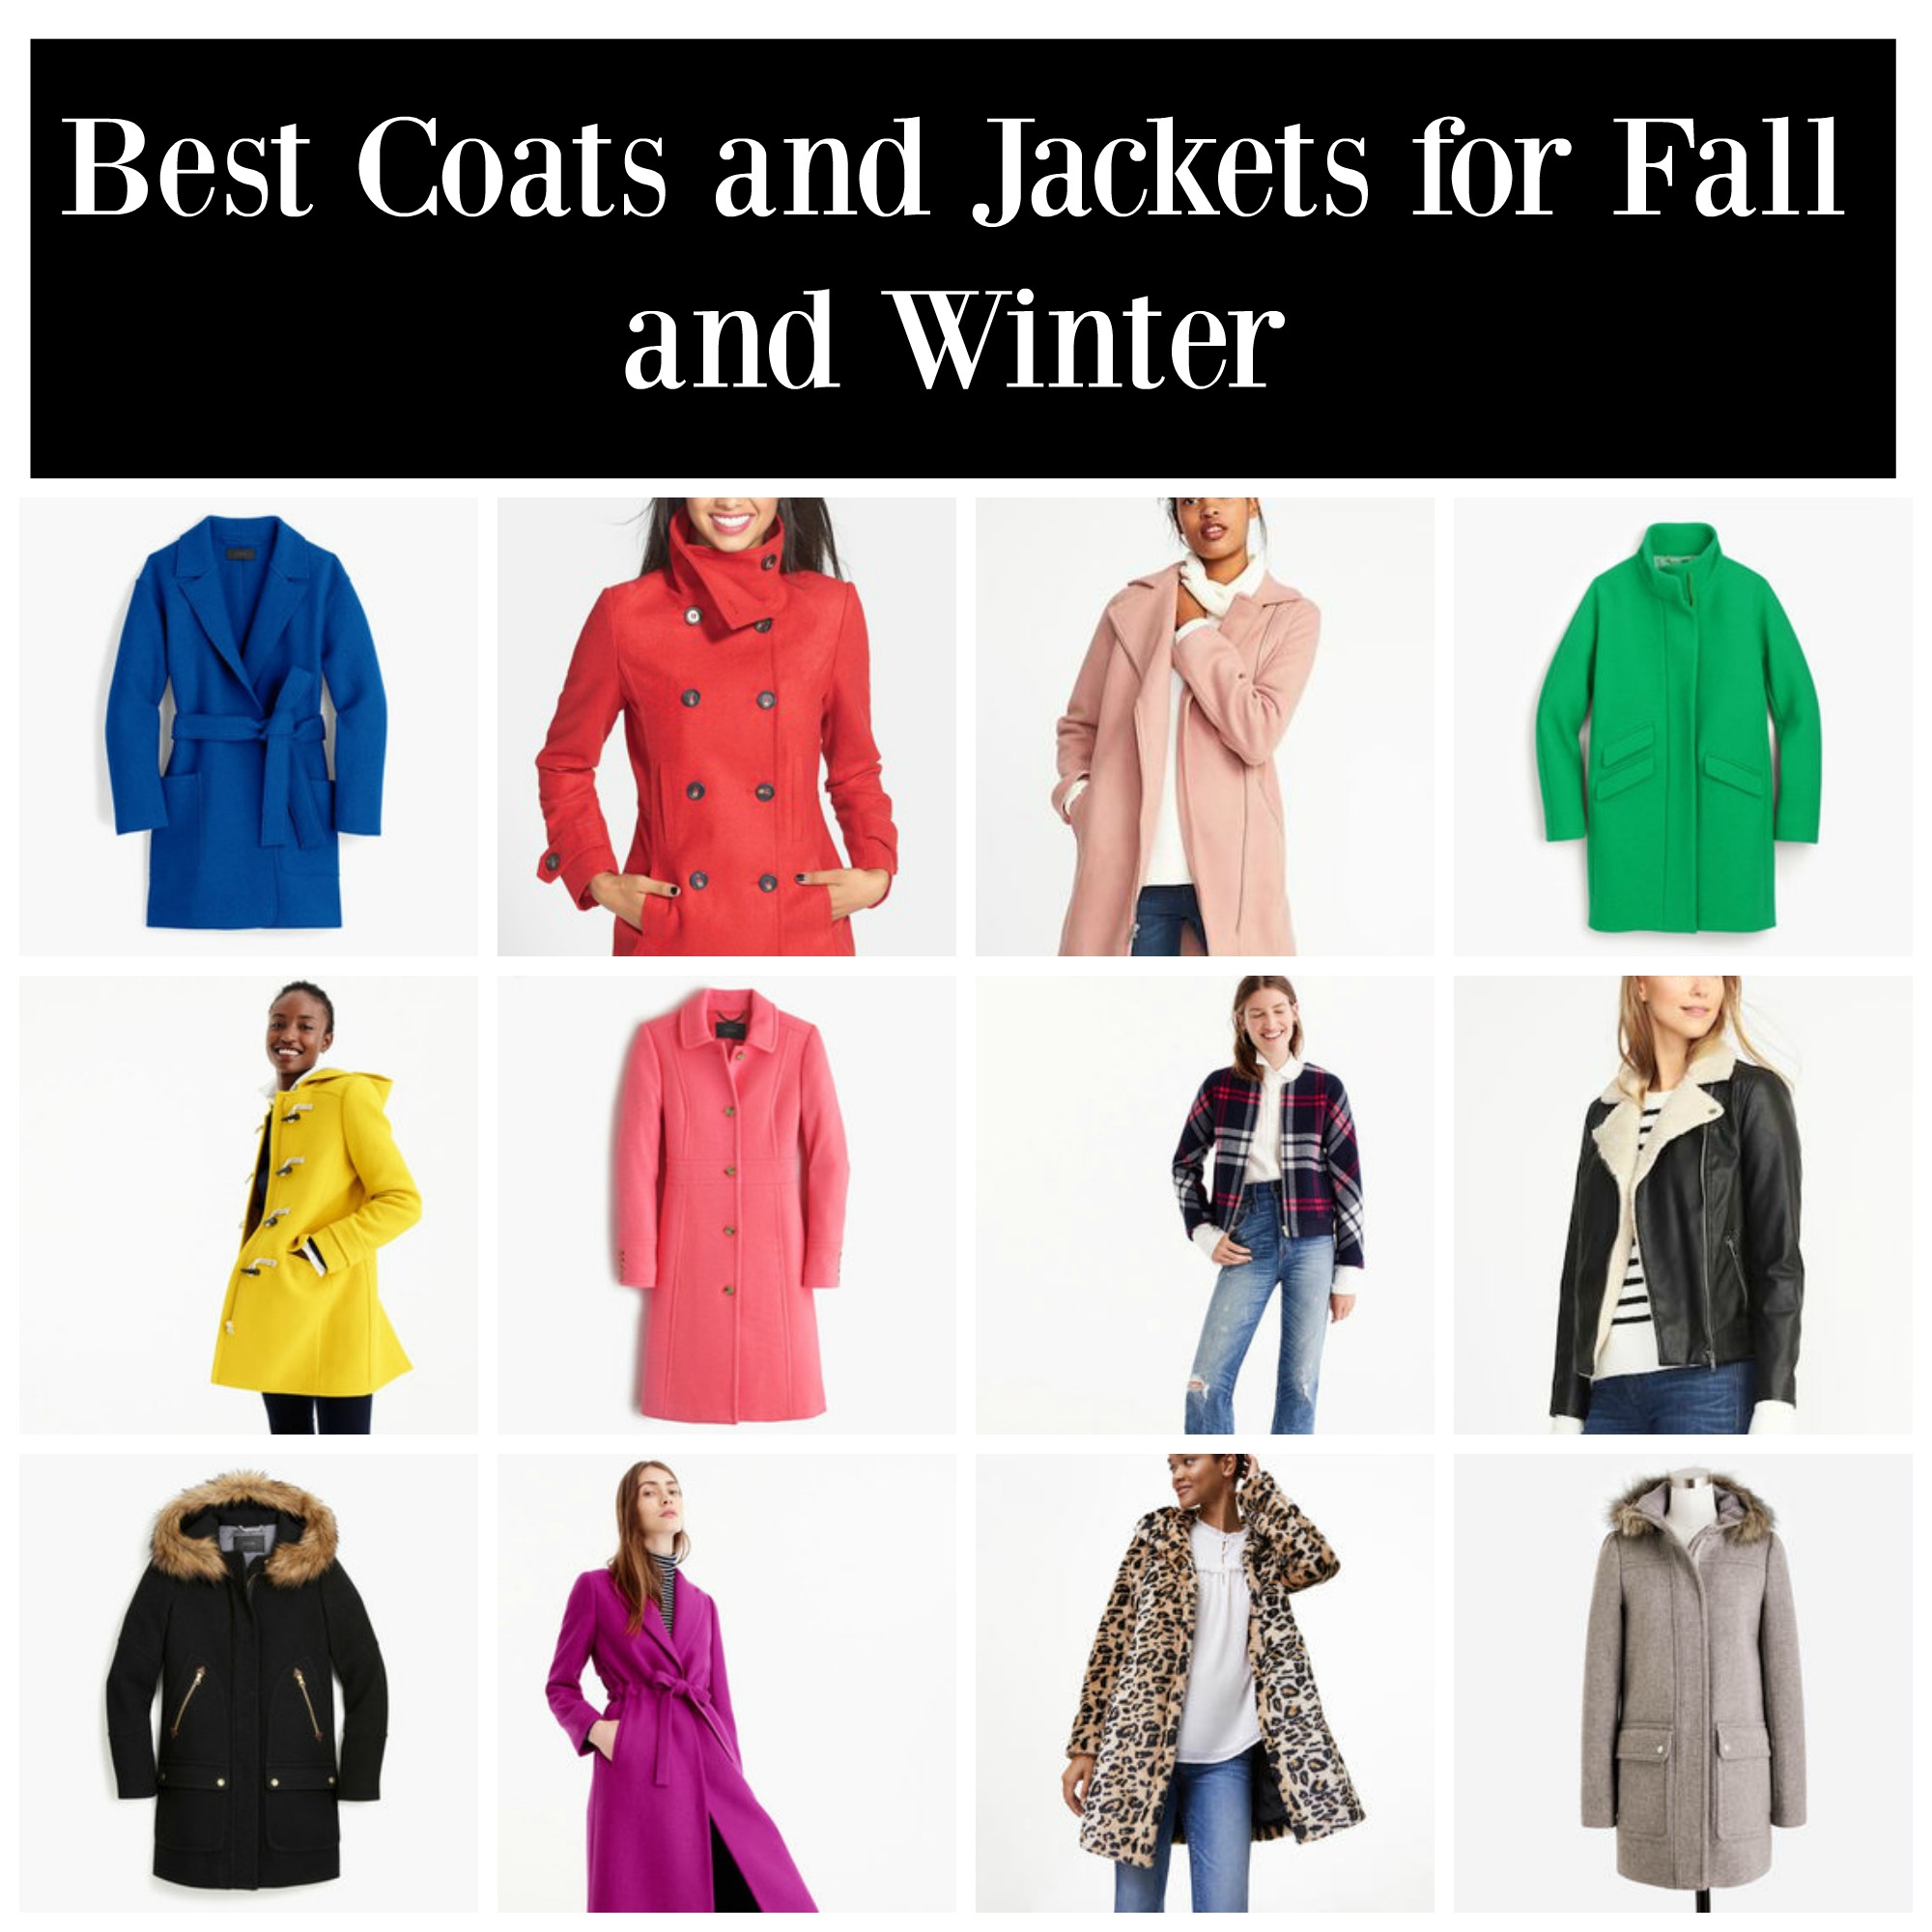 Best Coats and Jackets for Fall and Winter - Daily Dose of Style